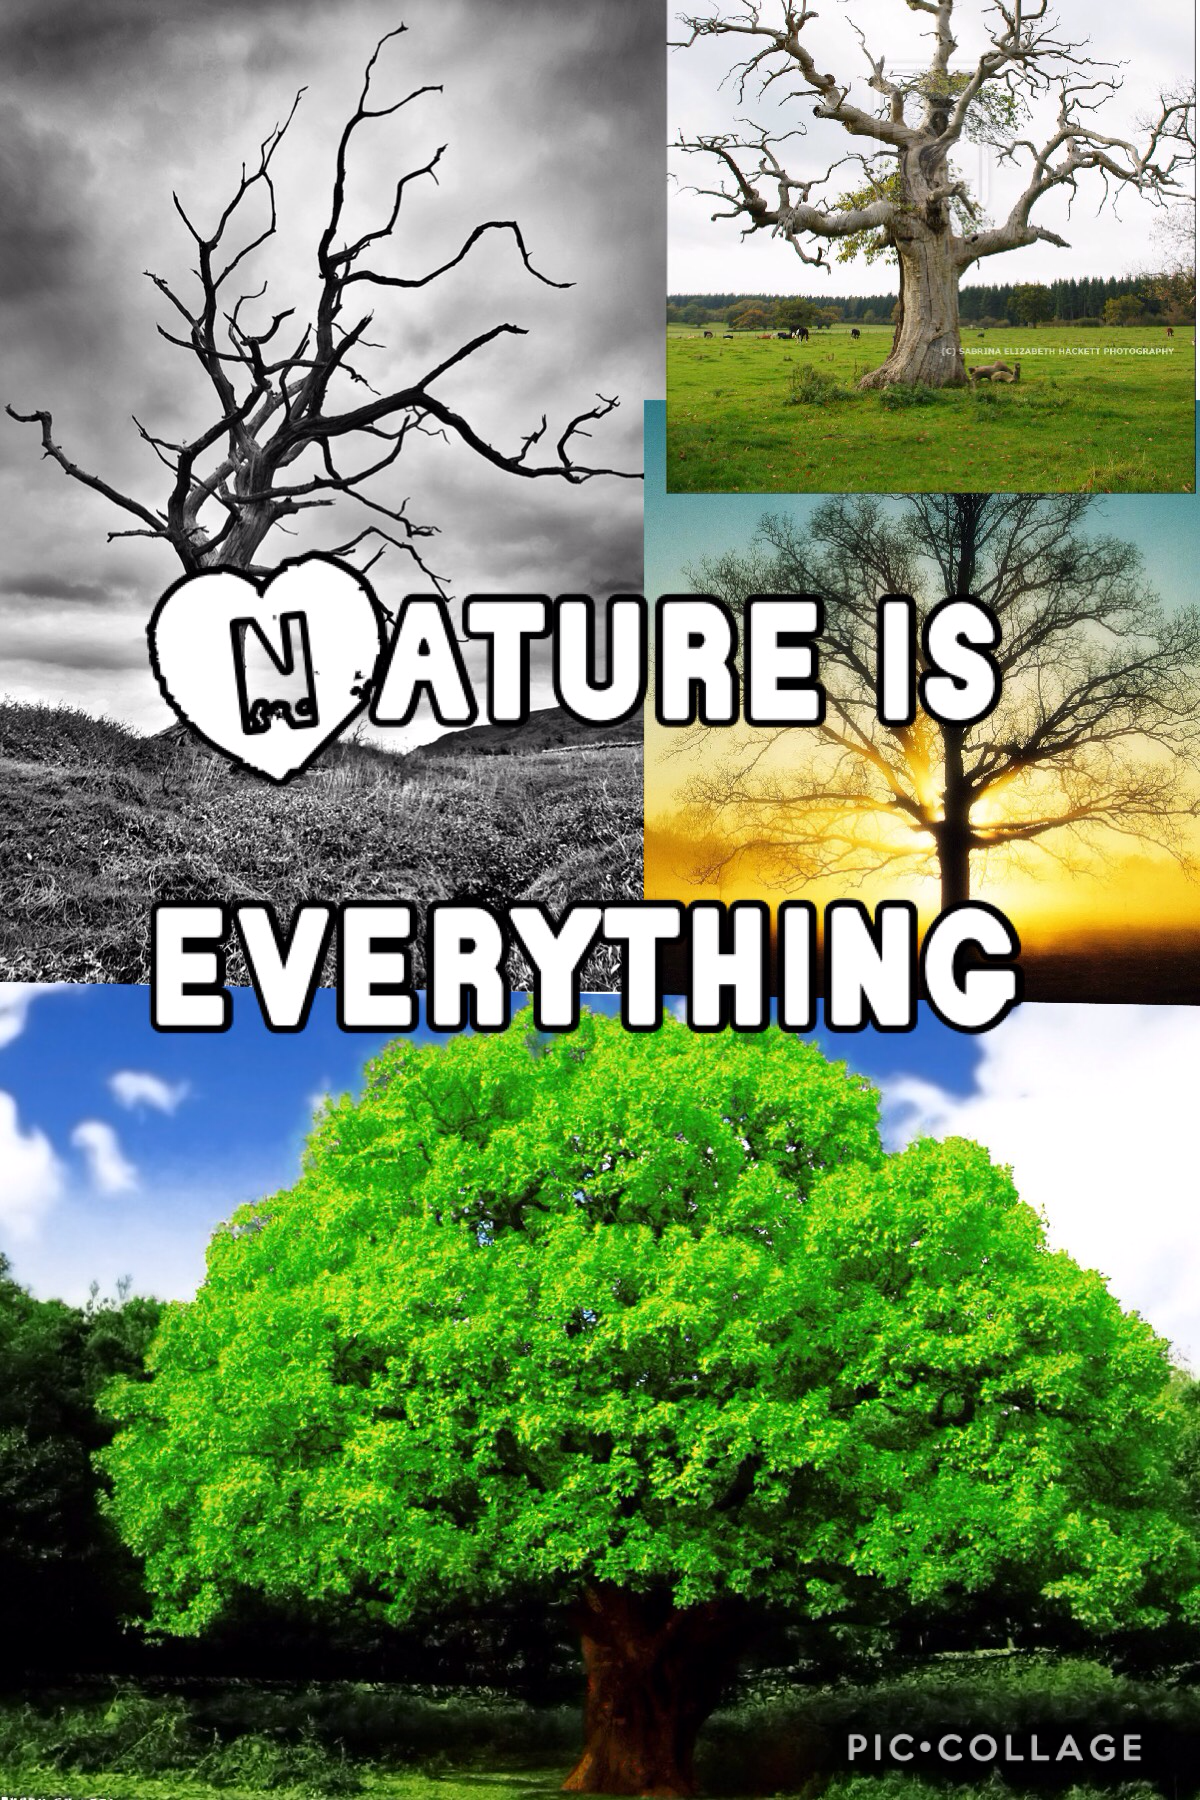 Nature is everything